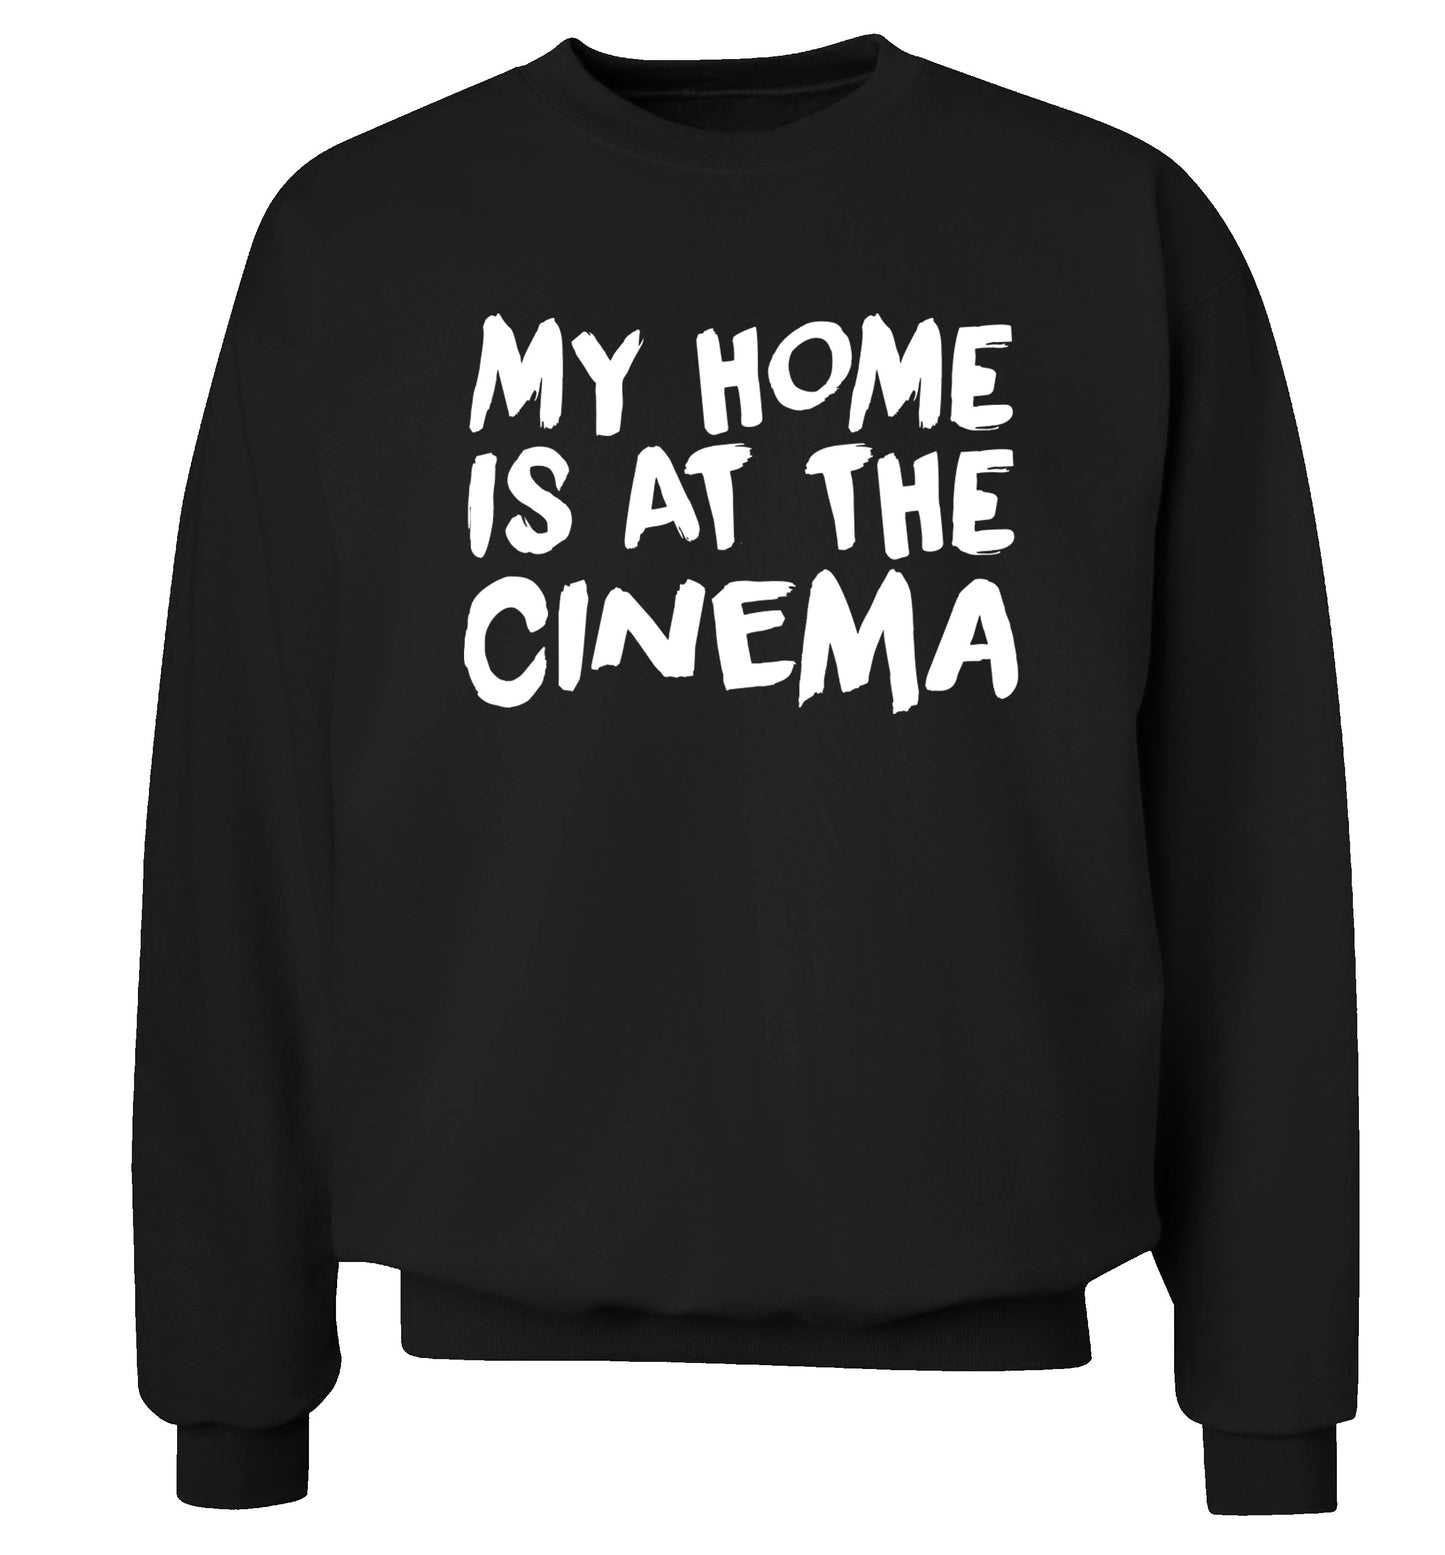 My home is at the cinema Adult's unisex black Sweater 2XL